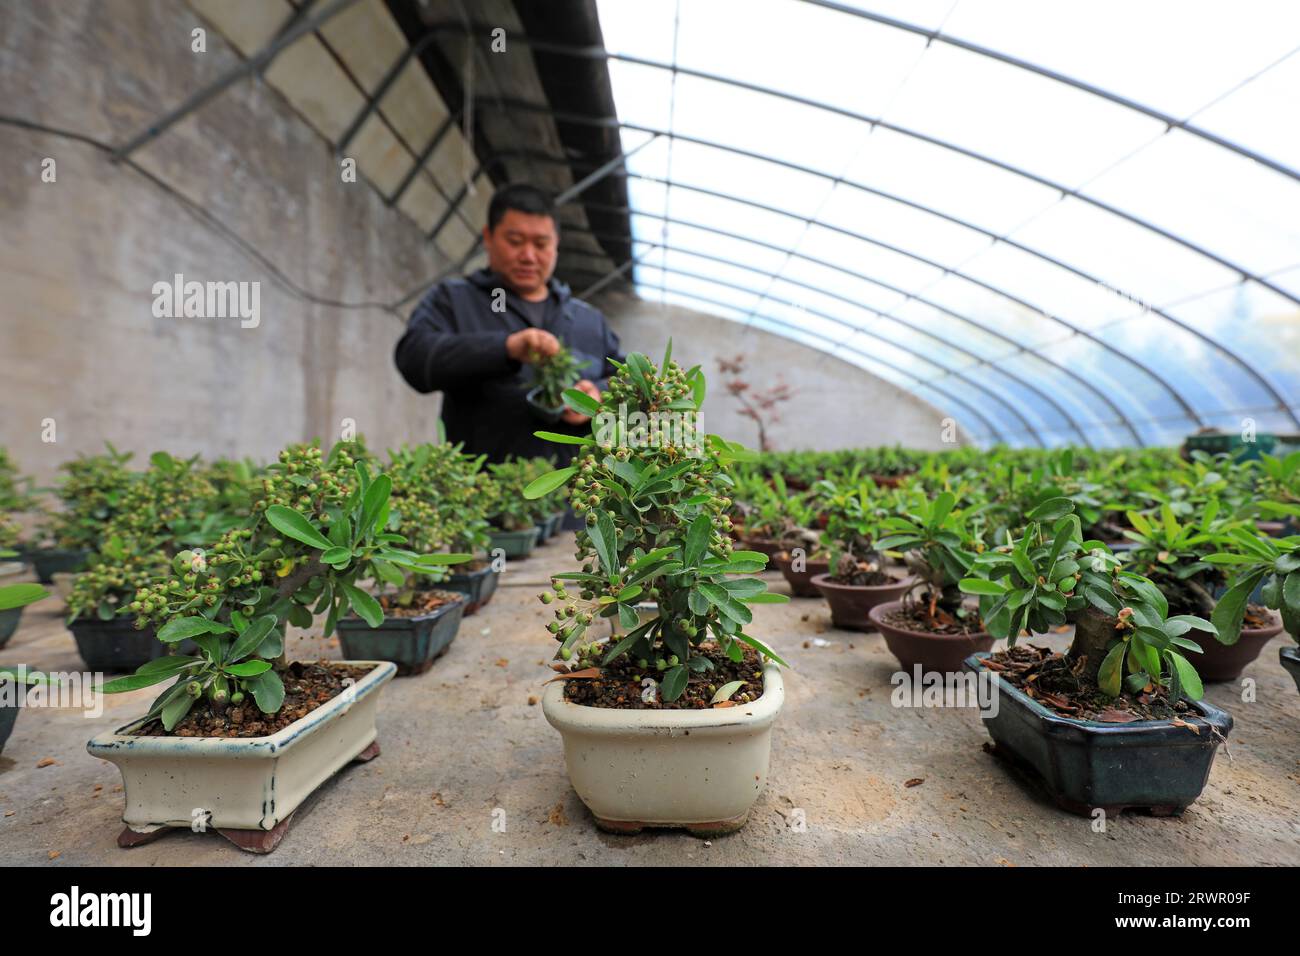 LUANNAN COUNTY, China - May 10, 2022: A gardener is pruning the bonsai of Pyracantha in a nursery, North China Stock Photo